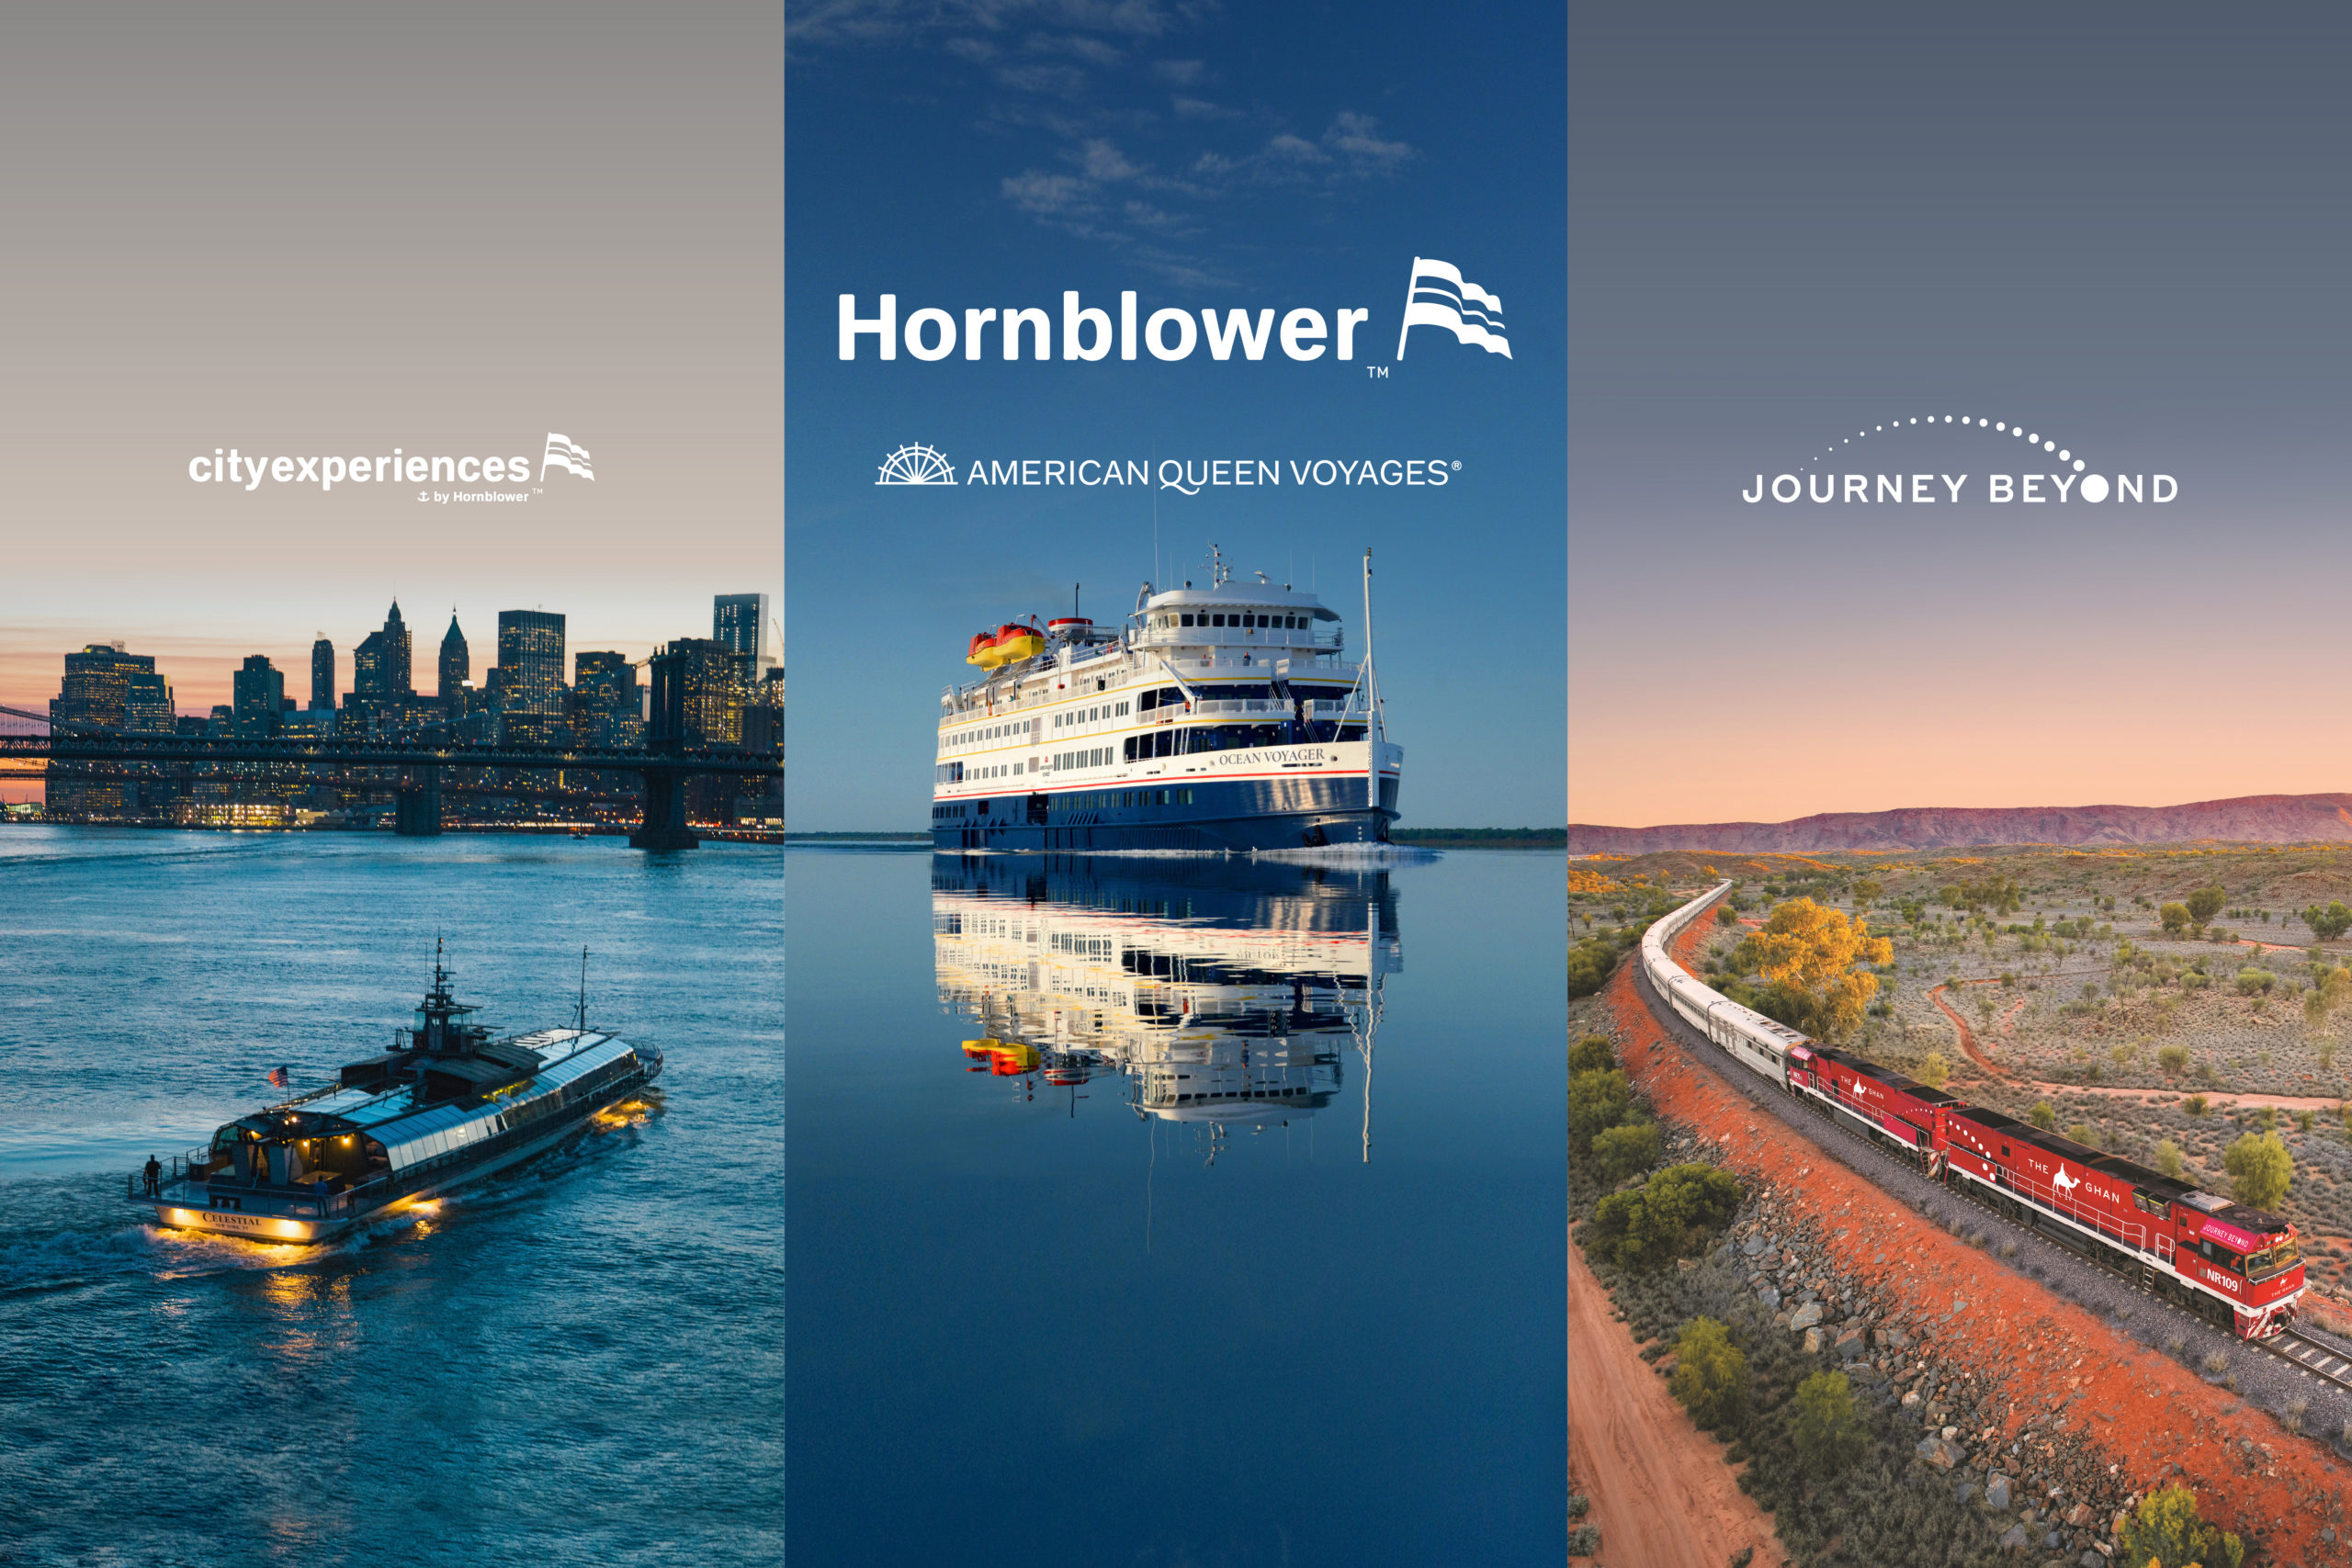 Bell tolls for AQV as parent company Hornblower acquired